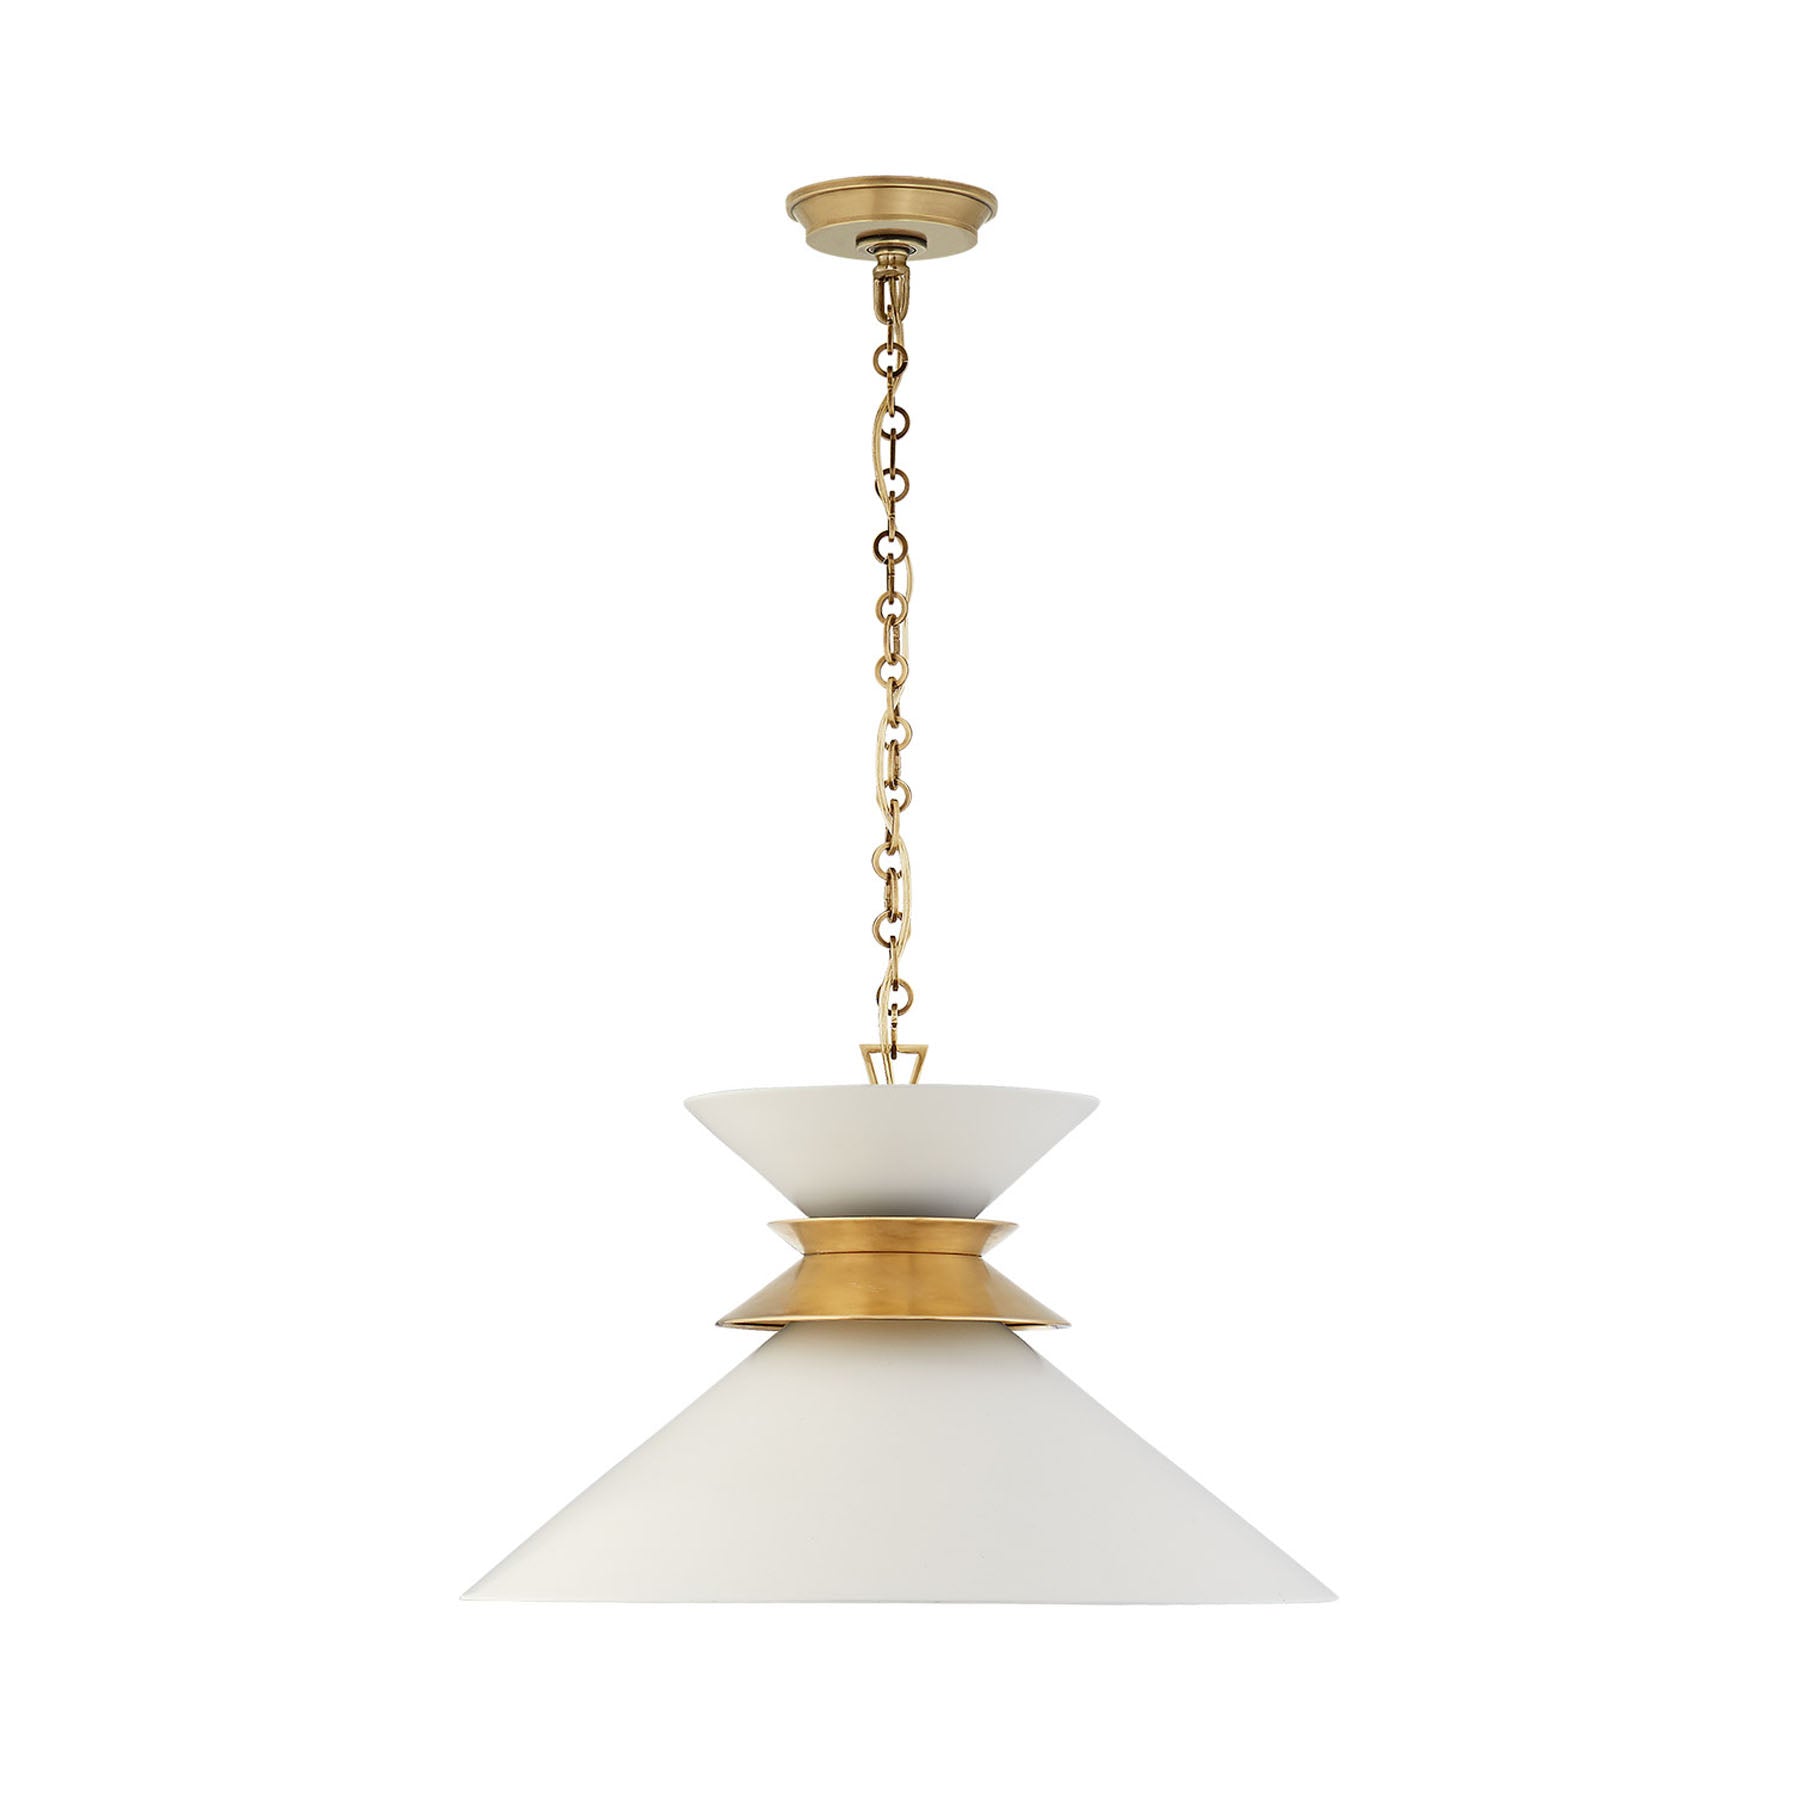 1 Light 24 inch Antique-Burnished Brass Pendant Ceiling Light in Matte White, Large Stacked